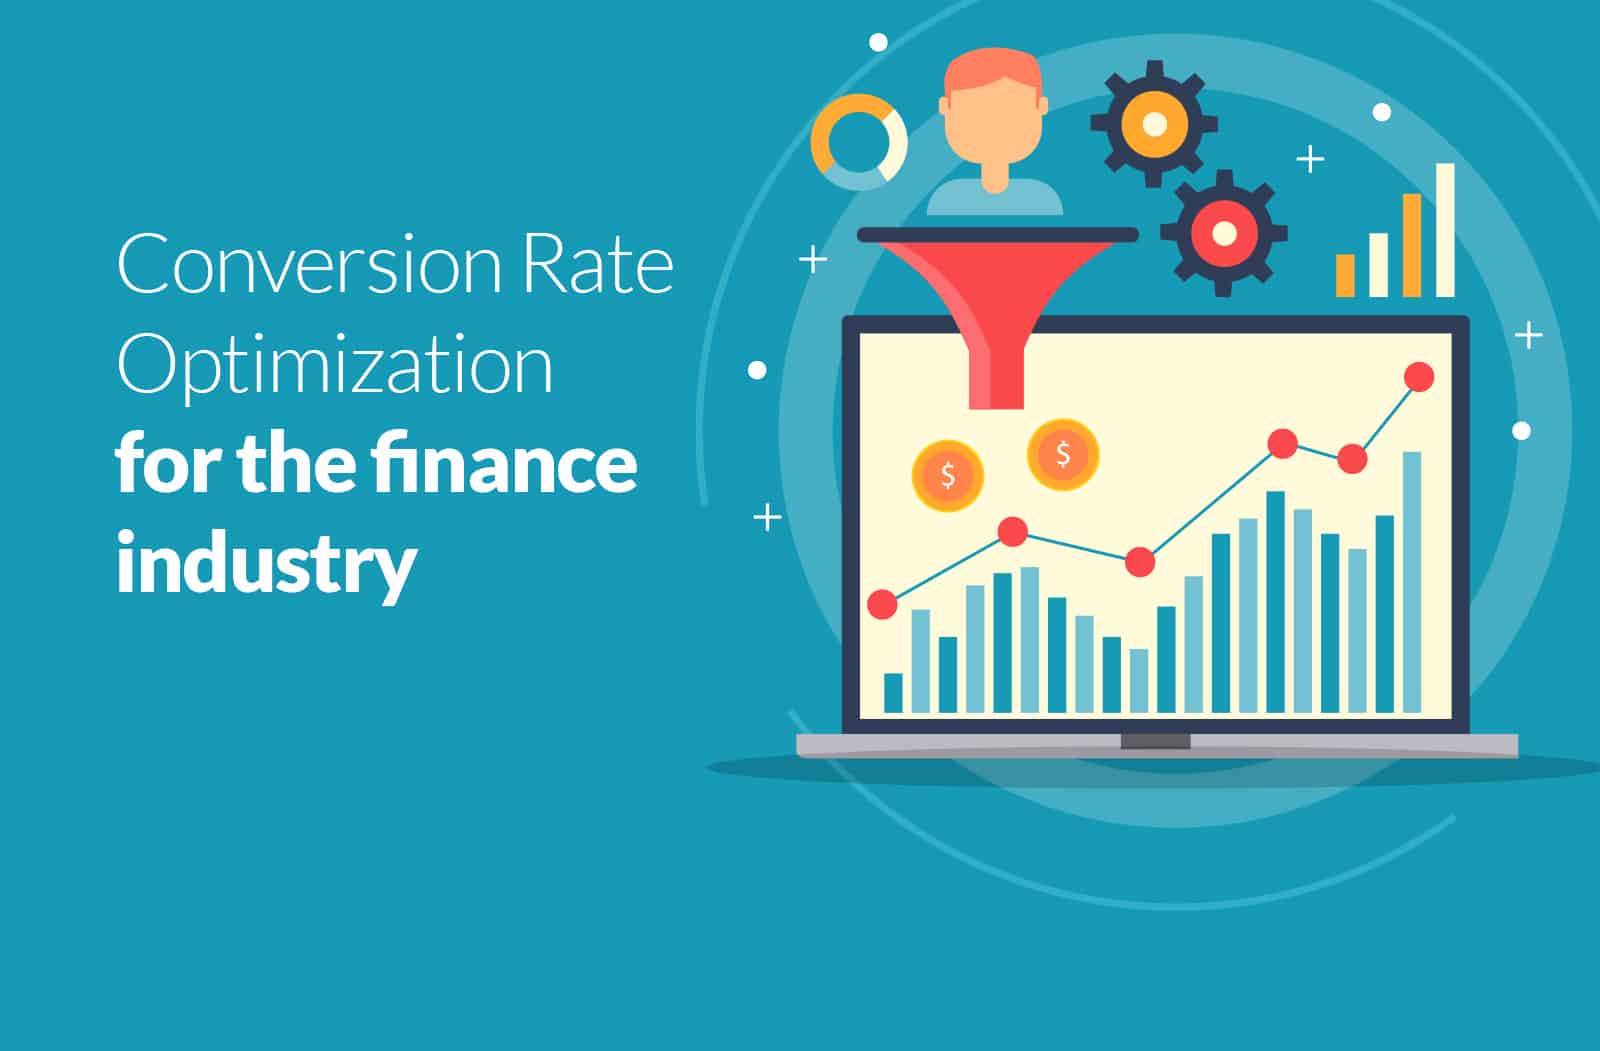 Conversion Rate Optimization for the Finance Industry